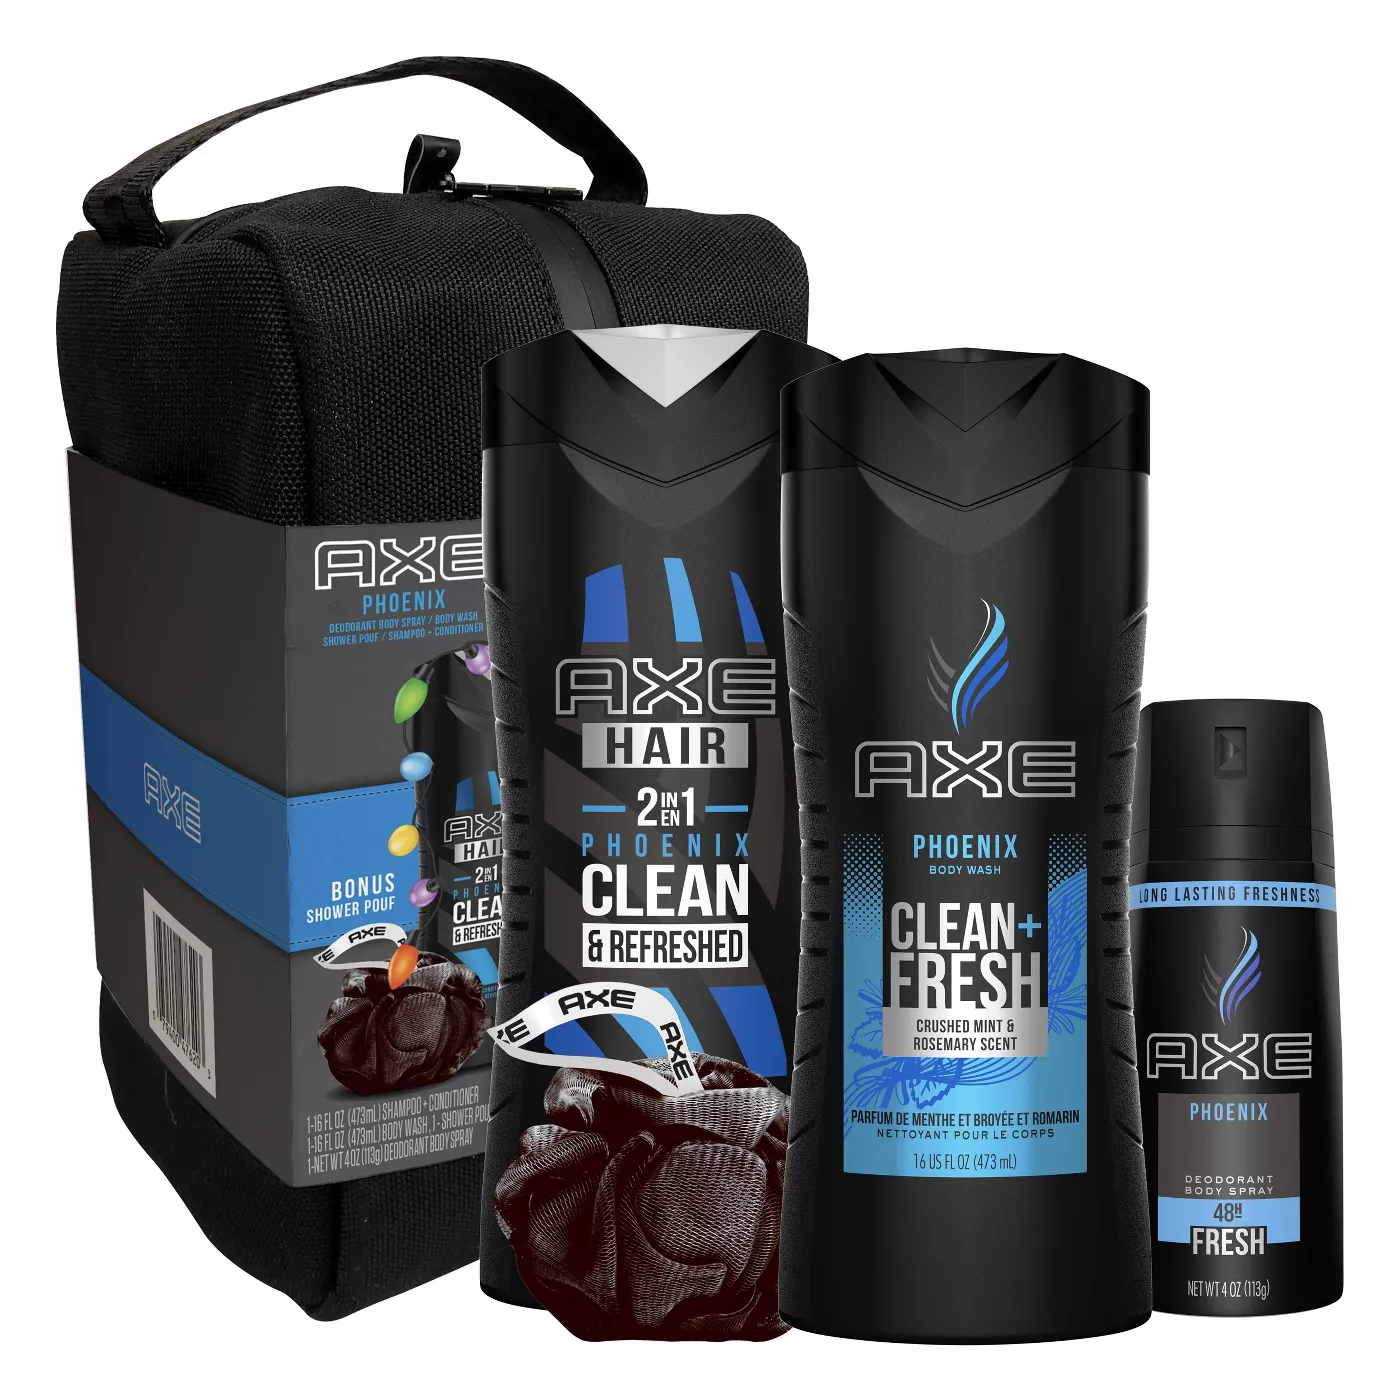 Axe Phoenix Body Wash + 2-in-1 Shampoo & Conditioner + Deodorant Body Spray + Body Pouf & Shower Bag Gift Pack Set - 5ct - image 1 of 5